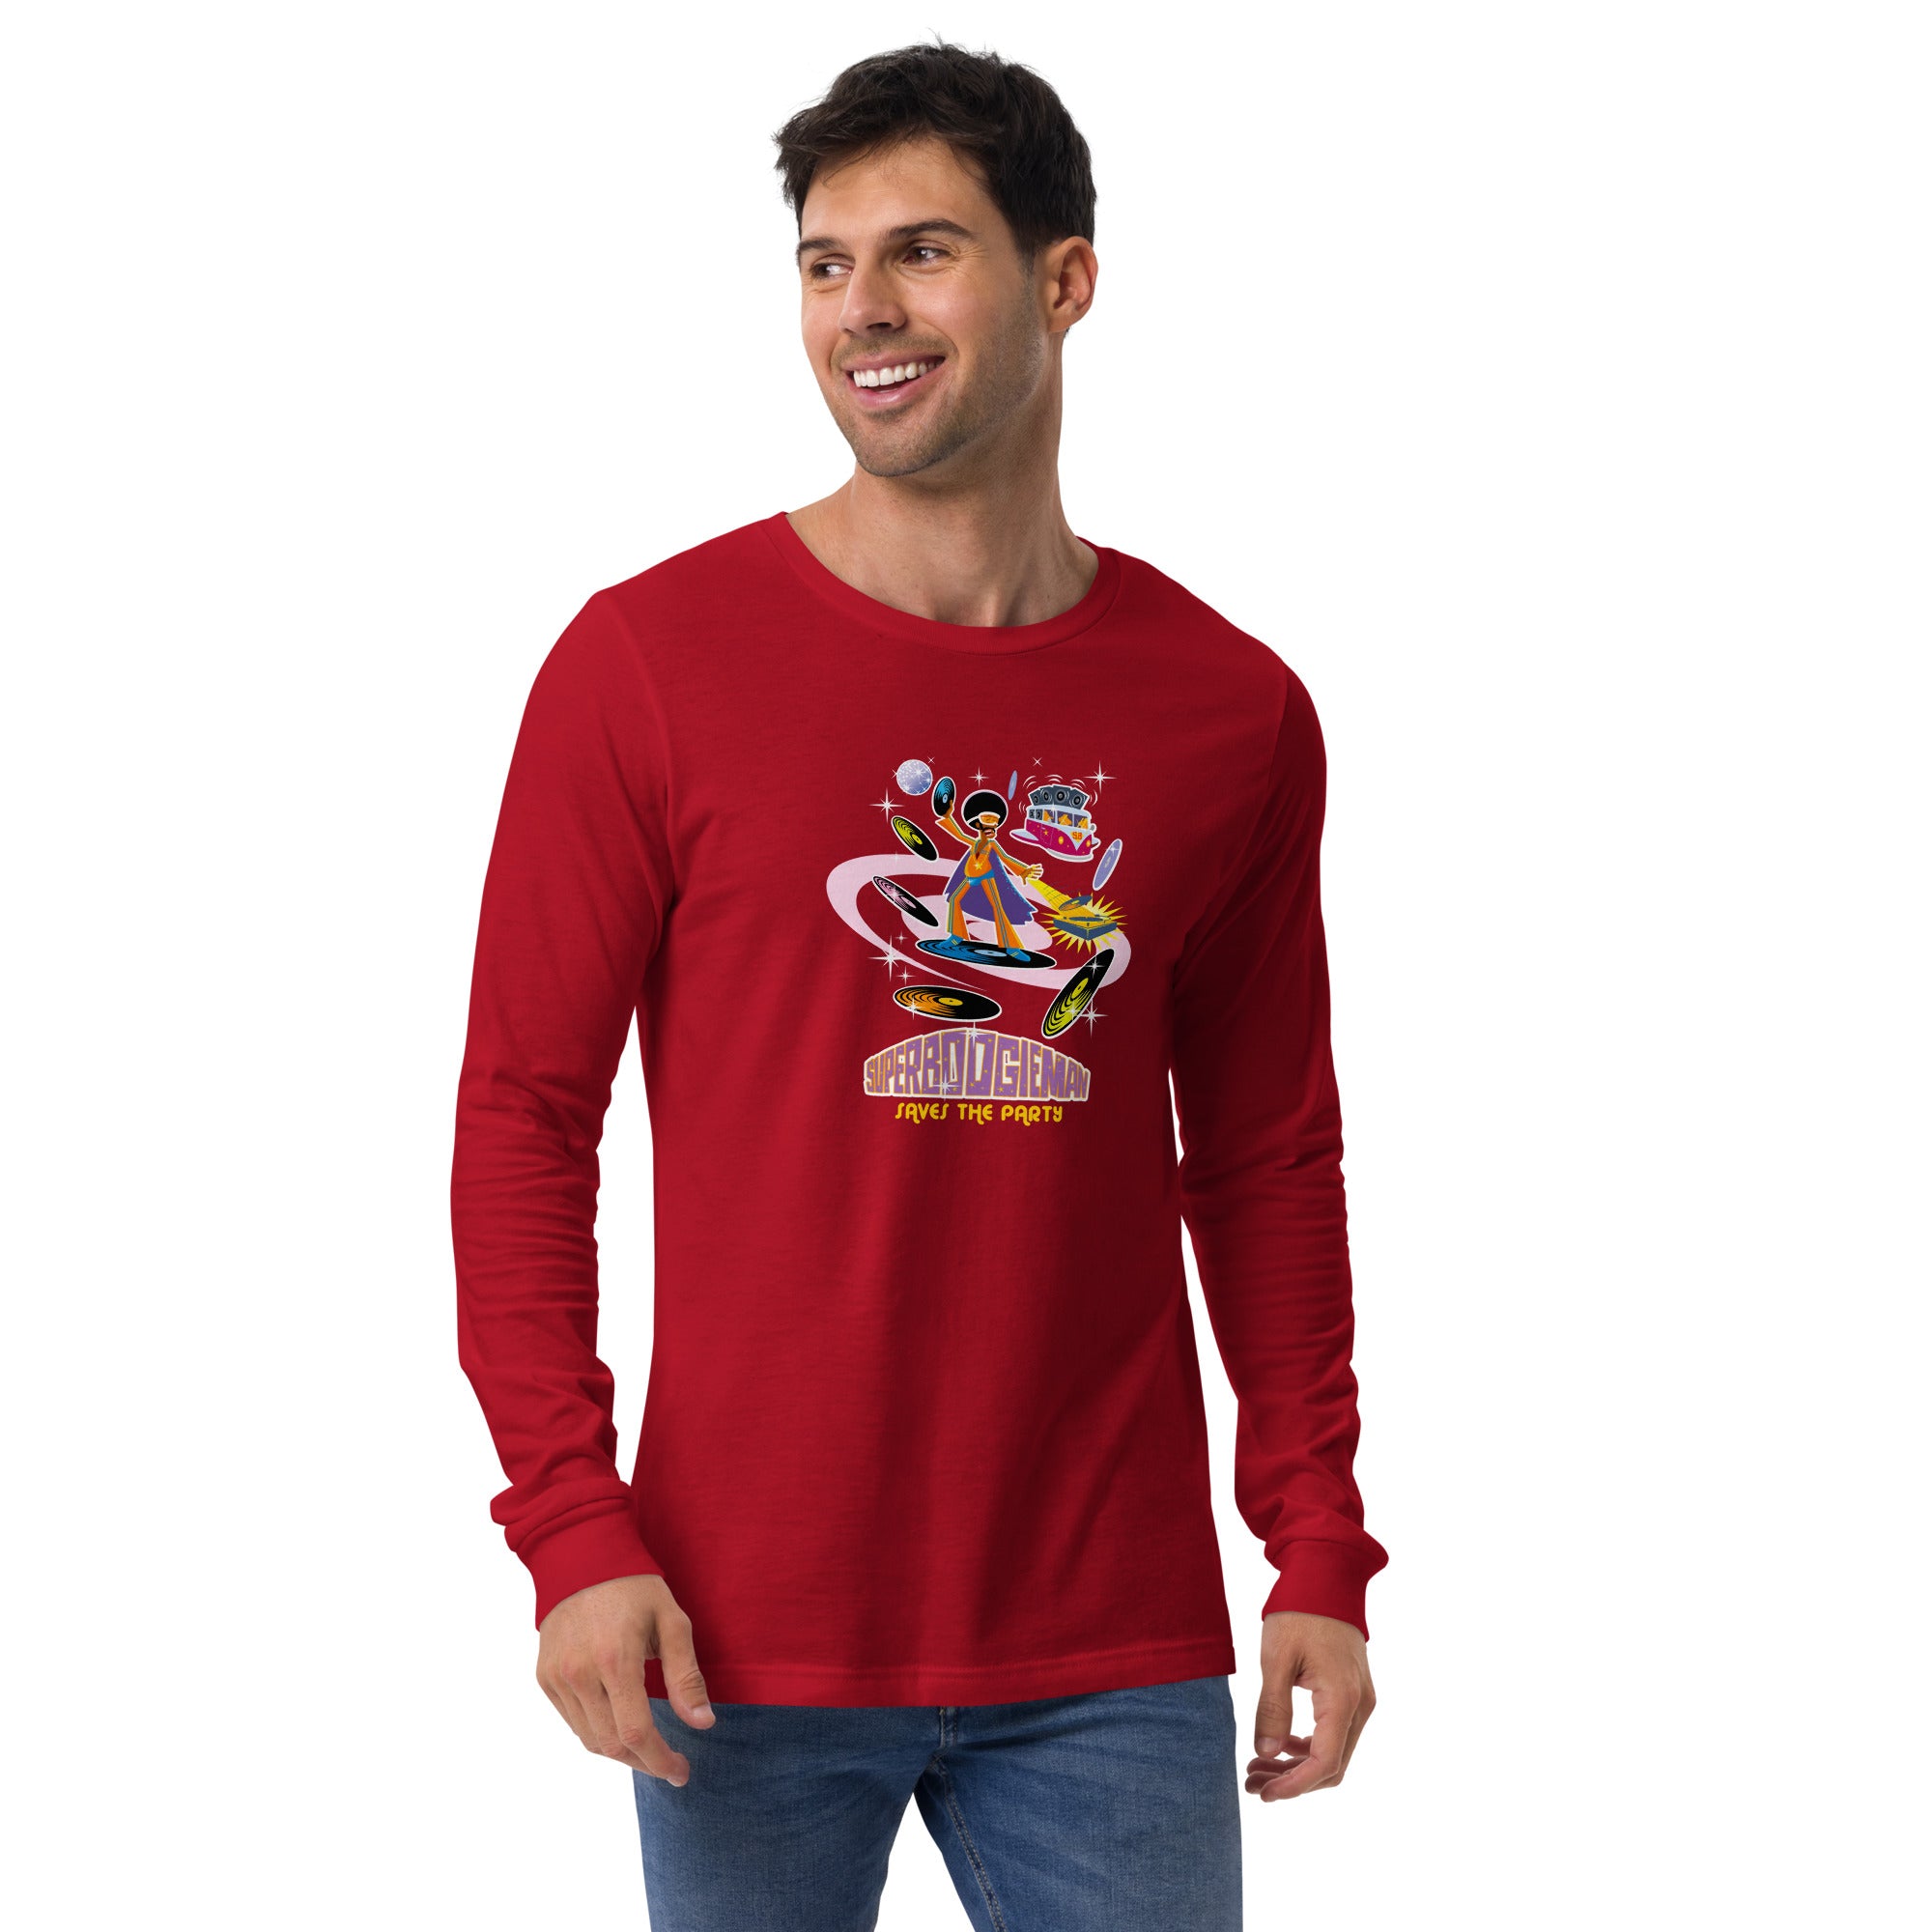 Unisex Long Sleeve Tee Superboogieman Saves the Party (front & back)